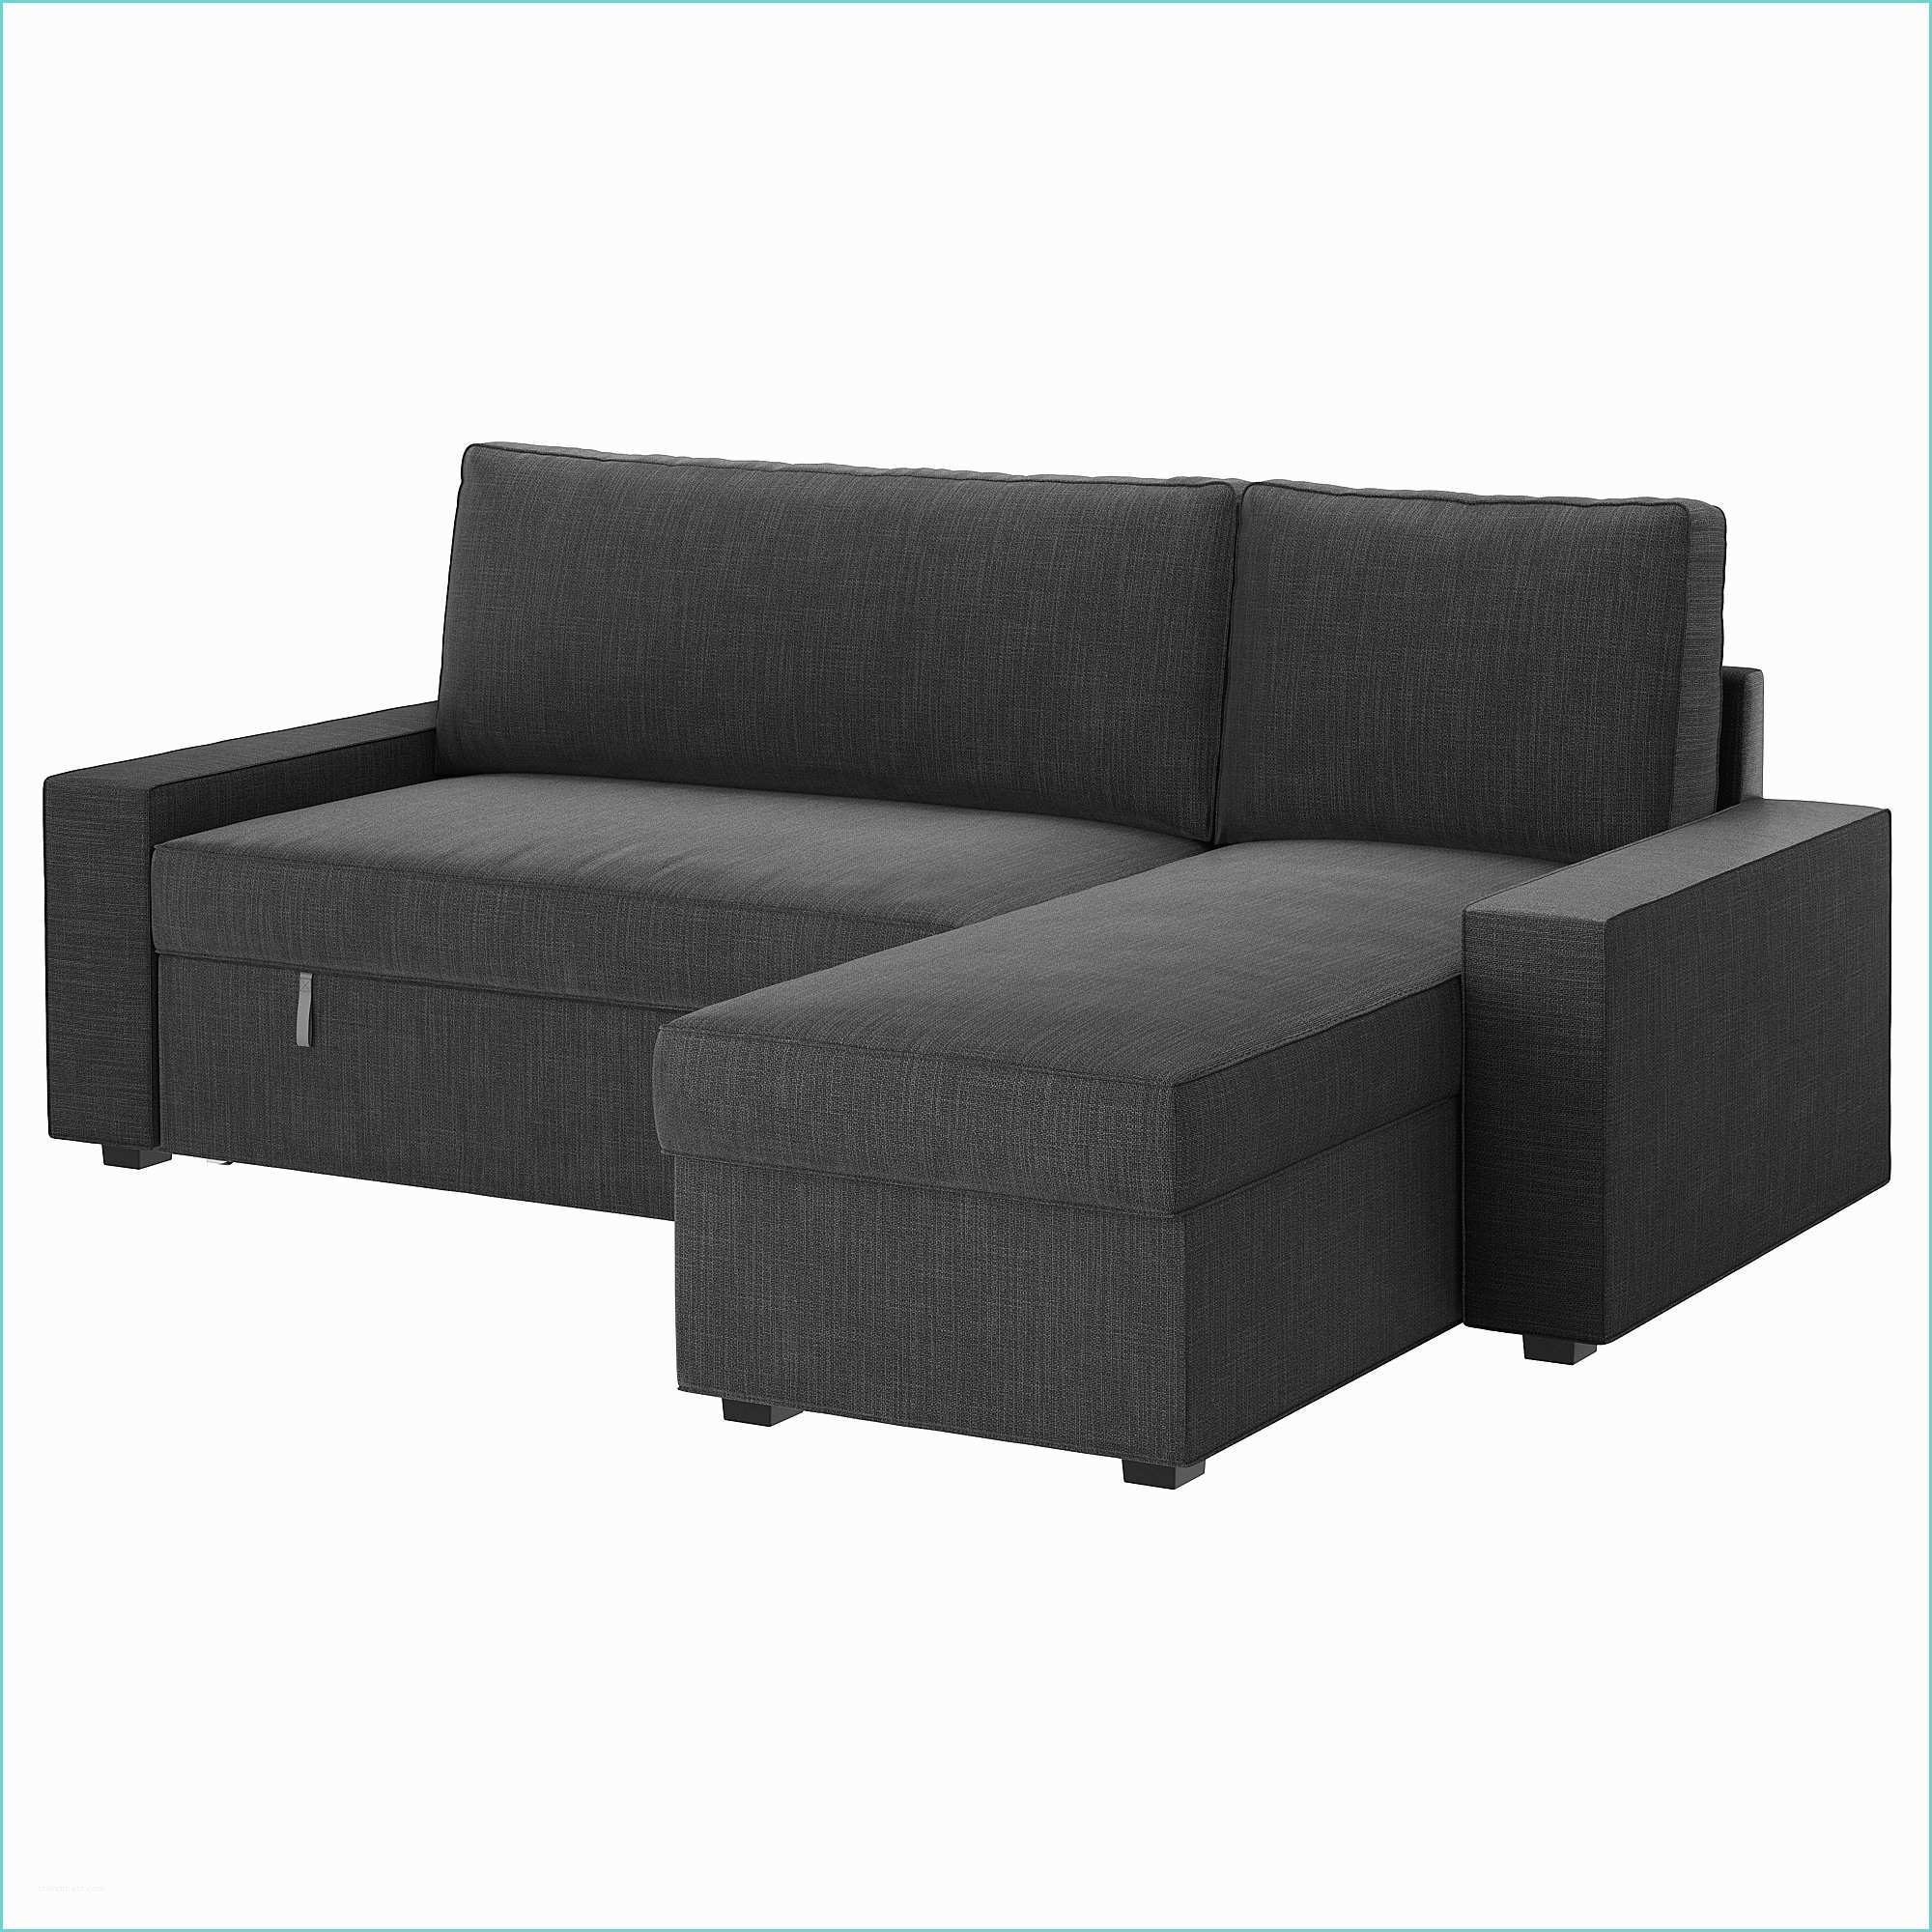 Sofa Beds In Ikea Vilasund sofa Bed with Chaise Longue Hillared Anthracite